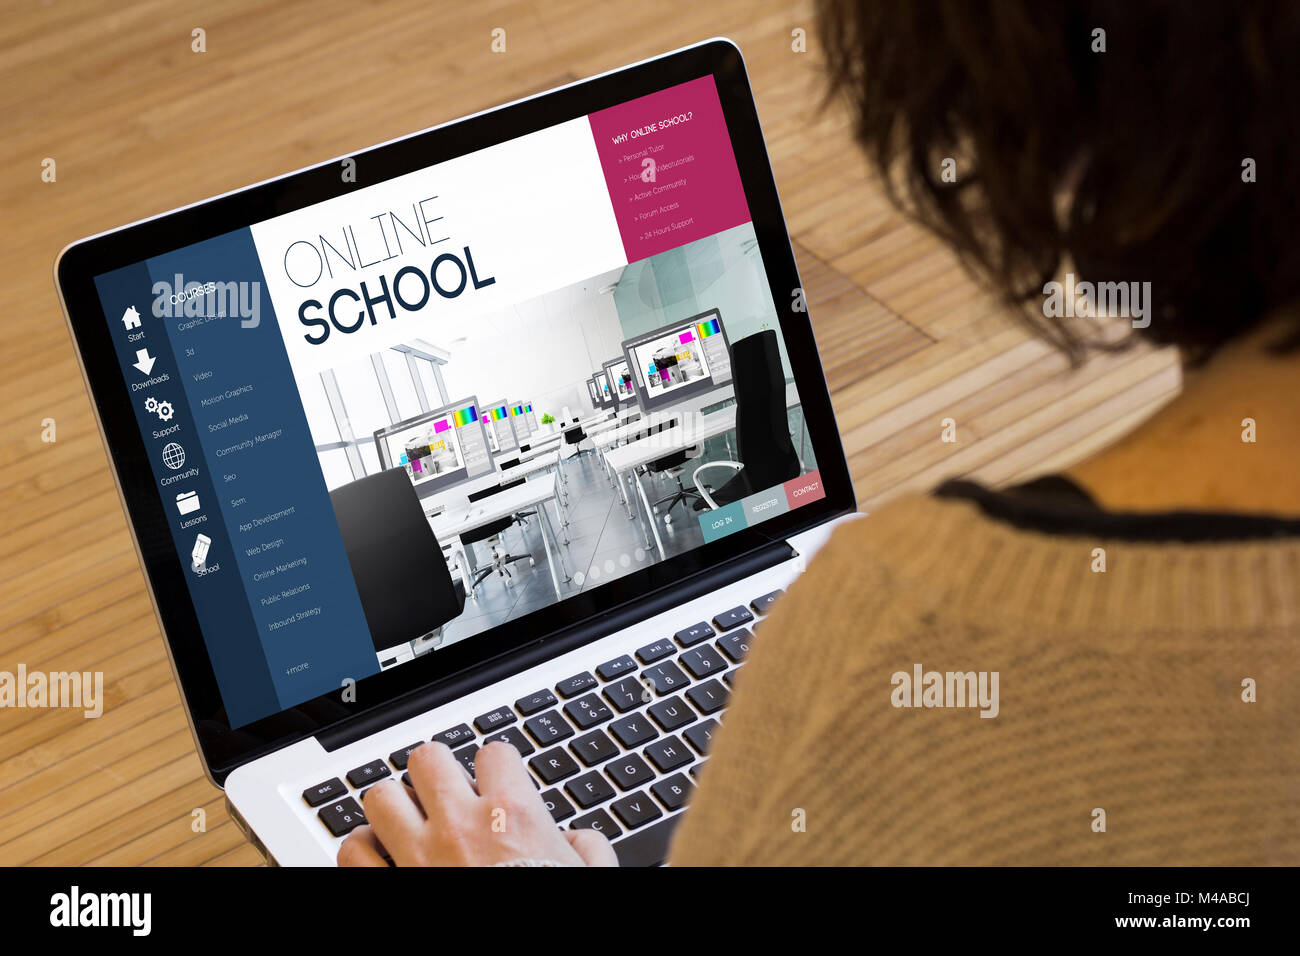 e-learning concept: online school on a laptop screen. Screen graphics are made up. Stock Photo